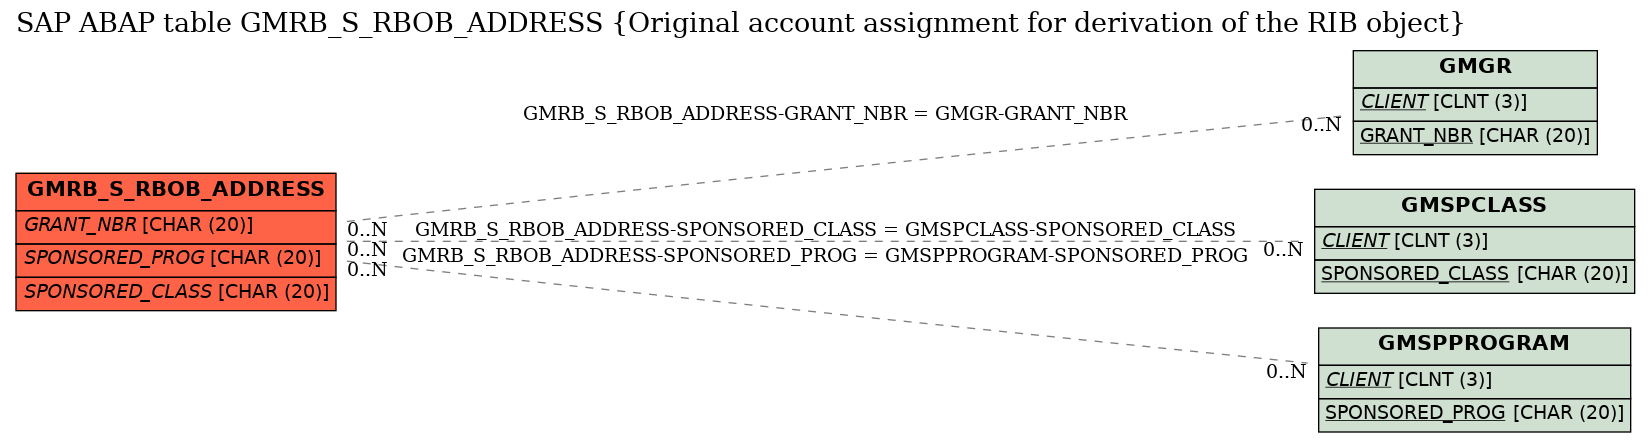 E-R Diagram for table GMRB_S_RBOB_ADDRESS (Original account assignment for derivation of the RIB object)